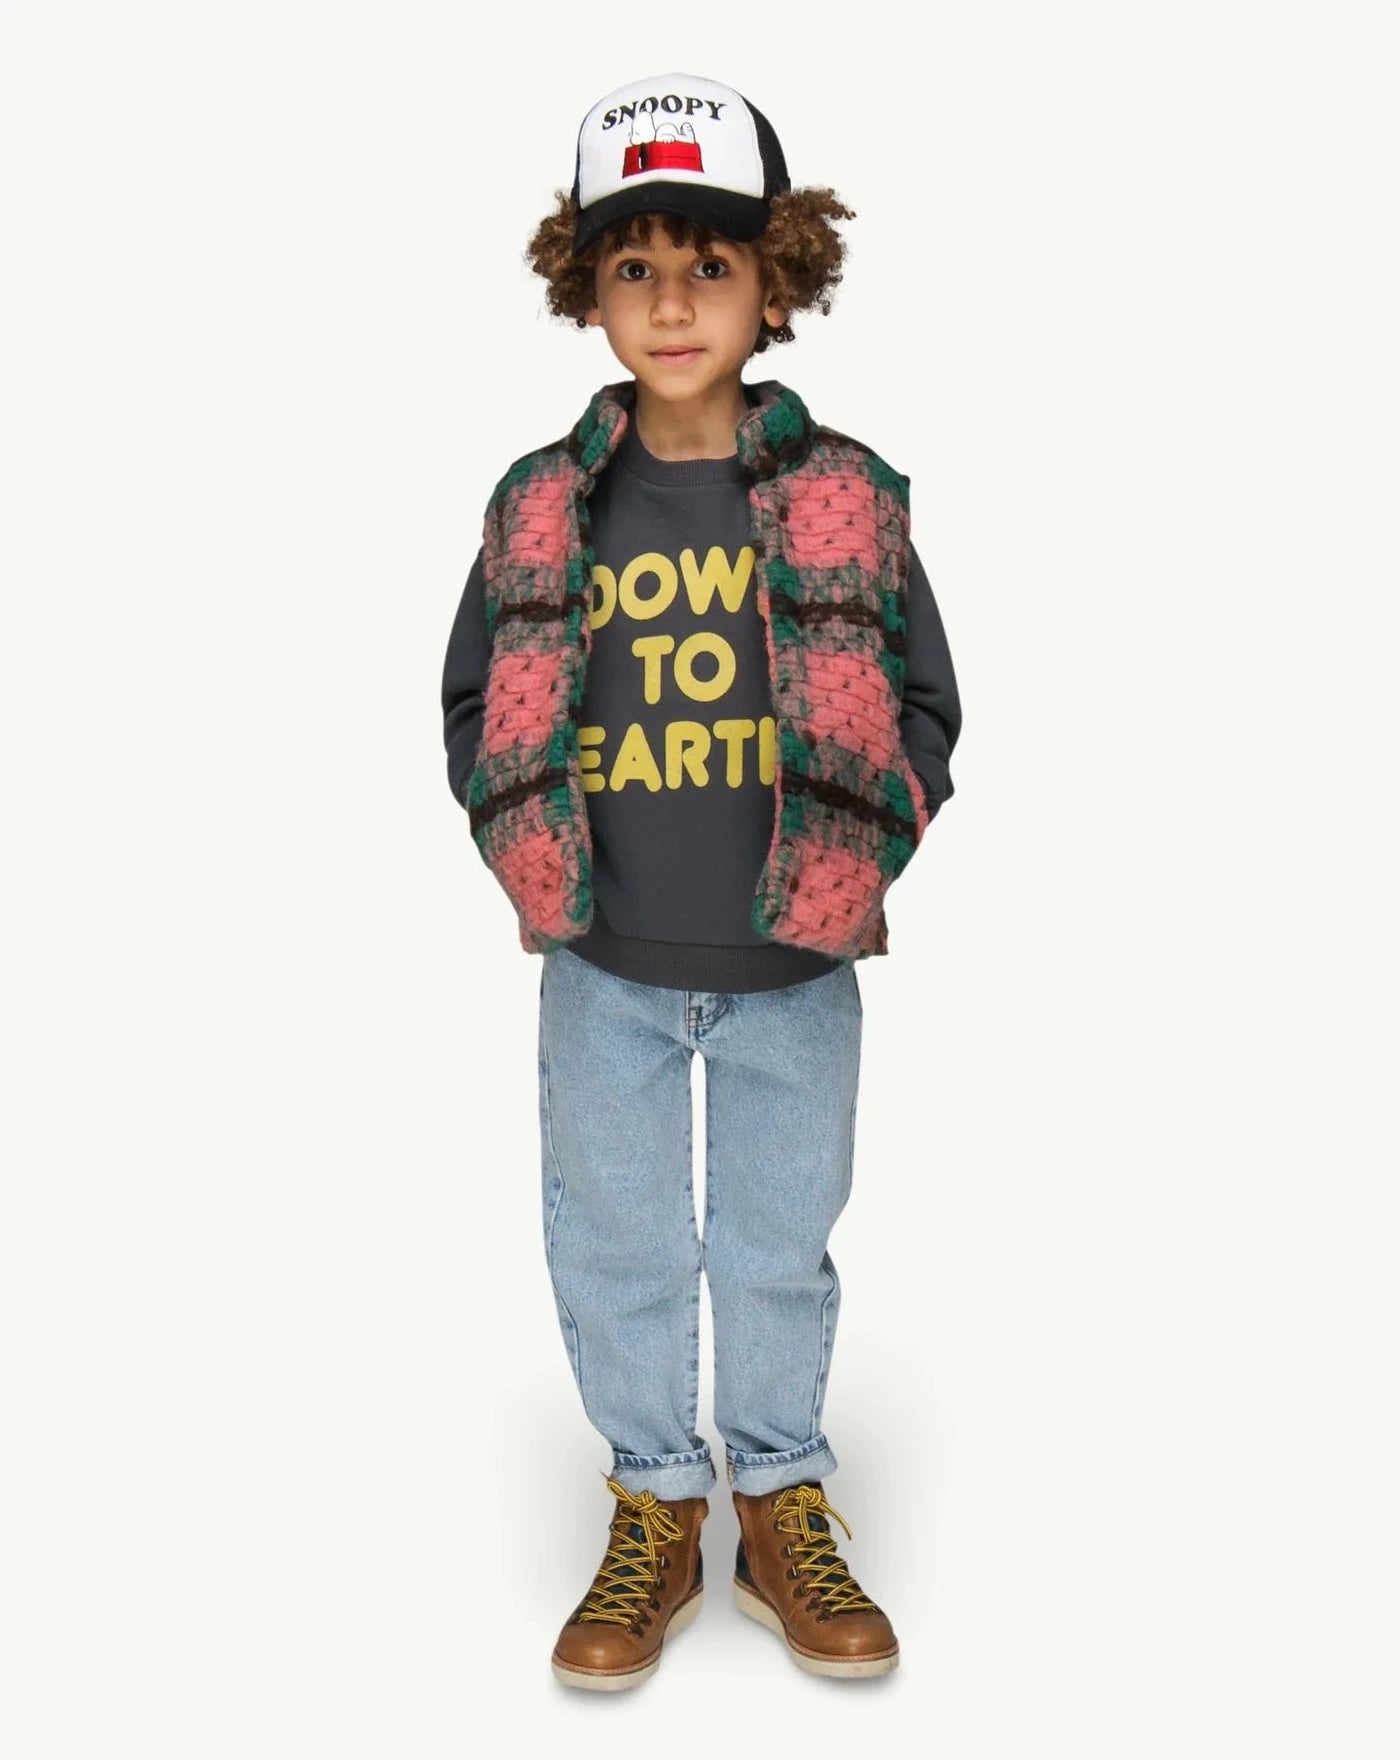 This picture shows a boy wearing a vintage black Sweater in a soft organic cotton fabric brushed on the inside with a bright yellow flock print text